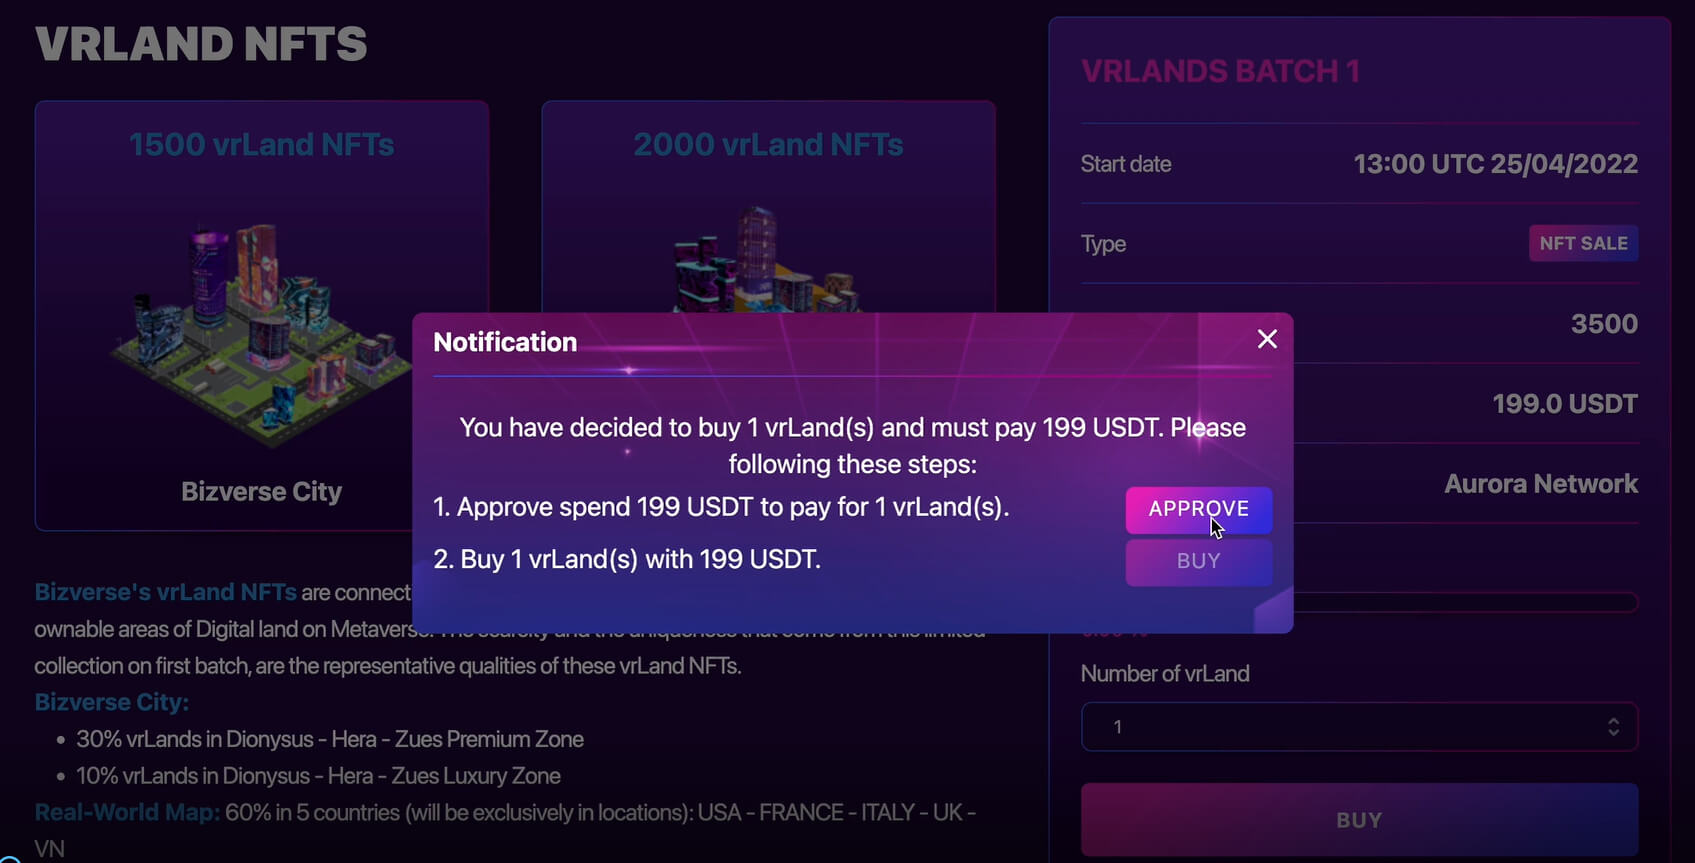 Confirm the purchase price of VrLand